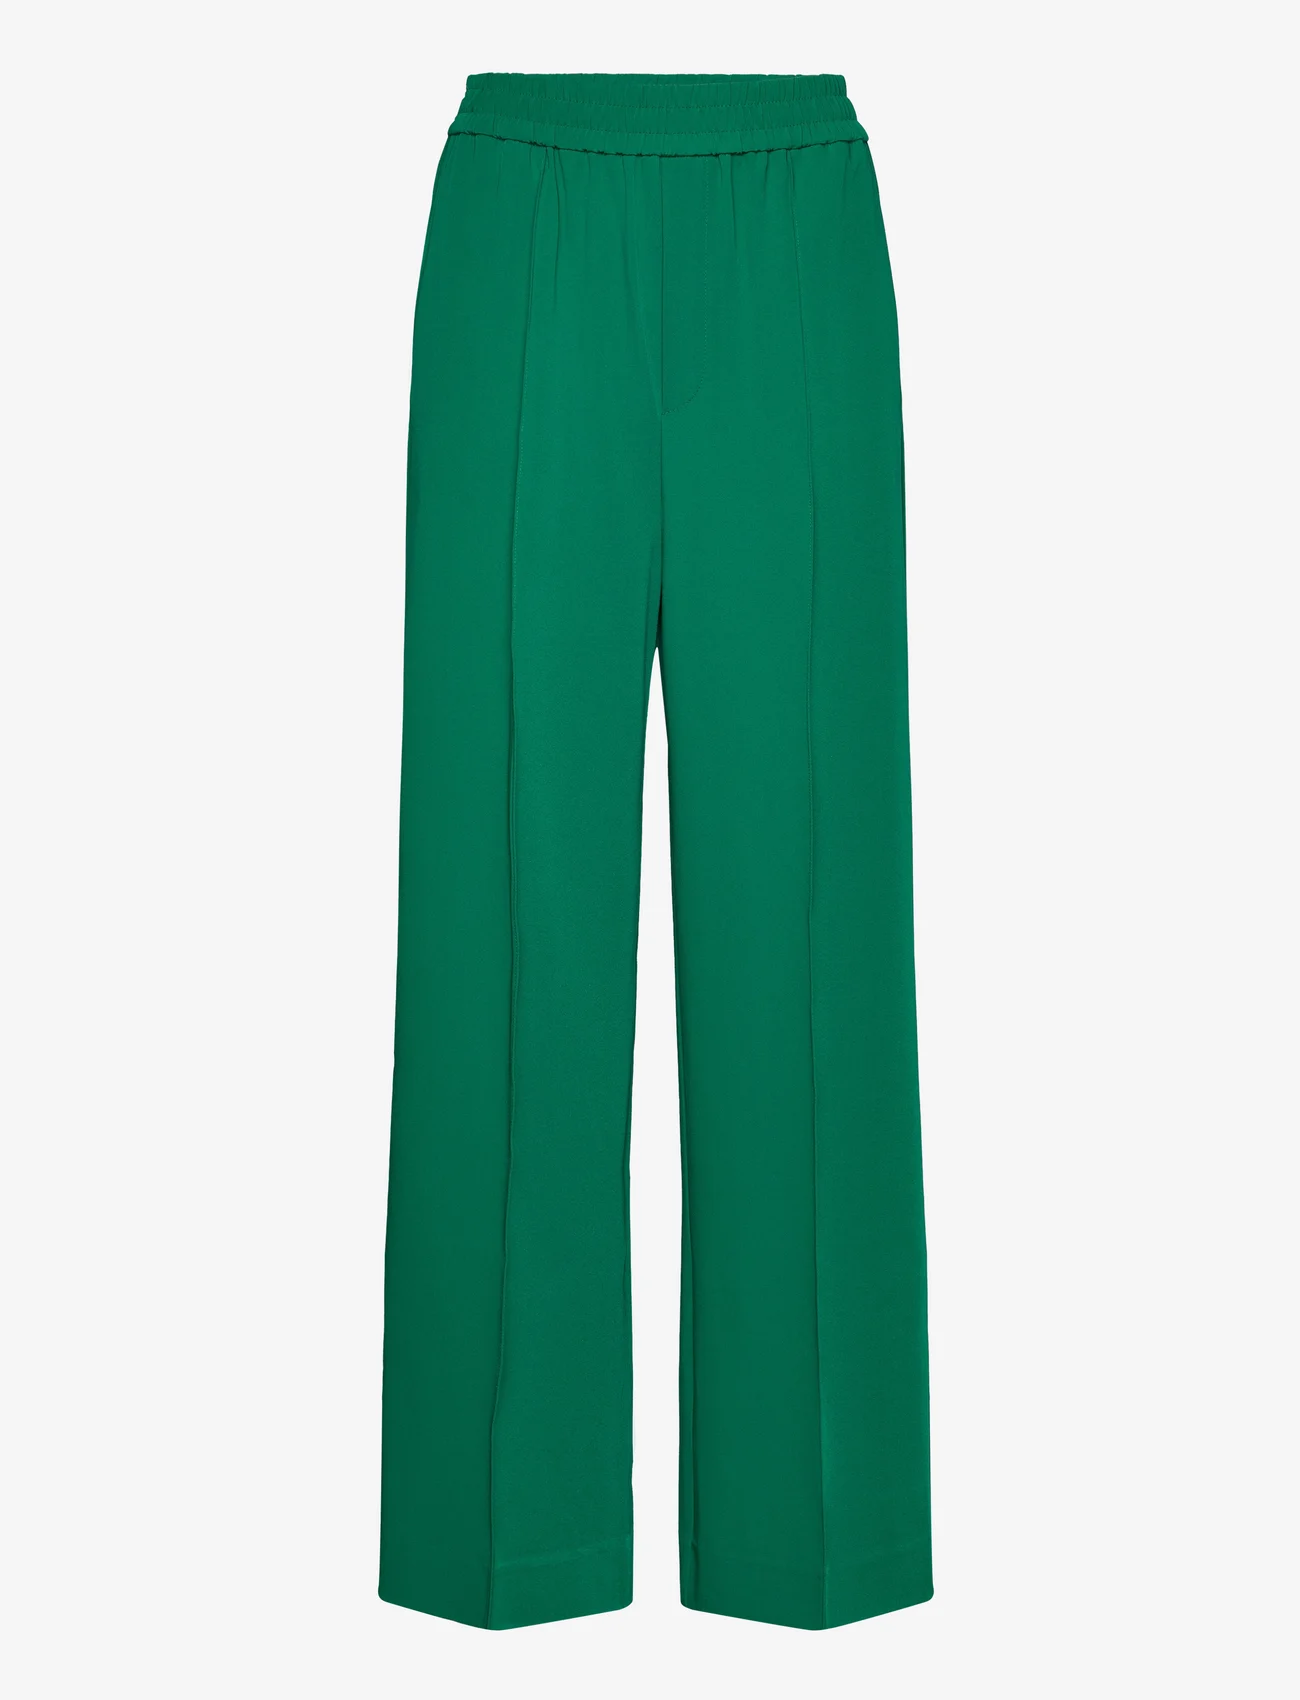 InWear - AdianIW Track Pant - tailored trousers - emerald green - 0